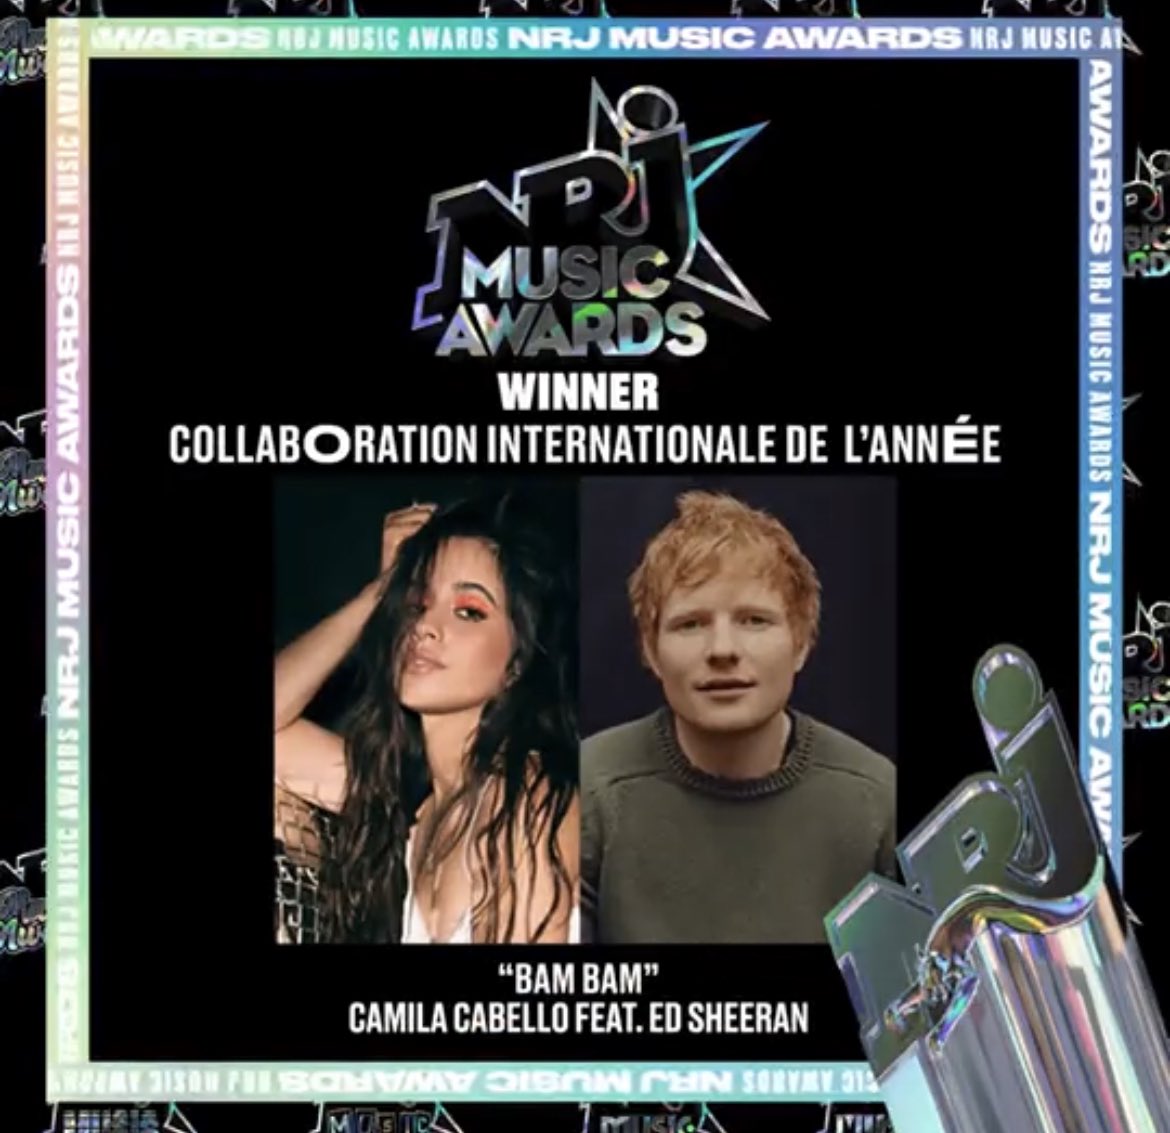 .@Camila_Cabello and @EdSheeran’s “Bam Bam” wins ‘International Collaboration of the Year’ at the @NRJMusicAwards. 

— It’s Cabello’s overall third award.